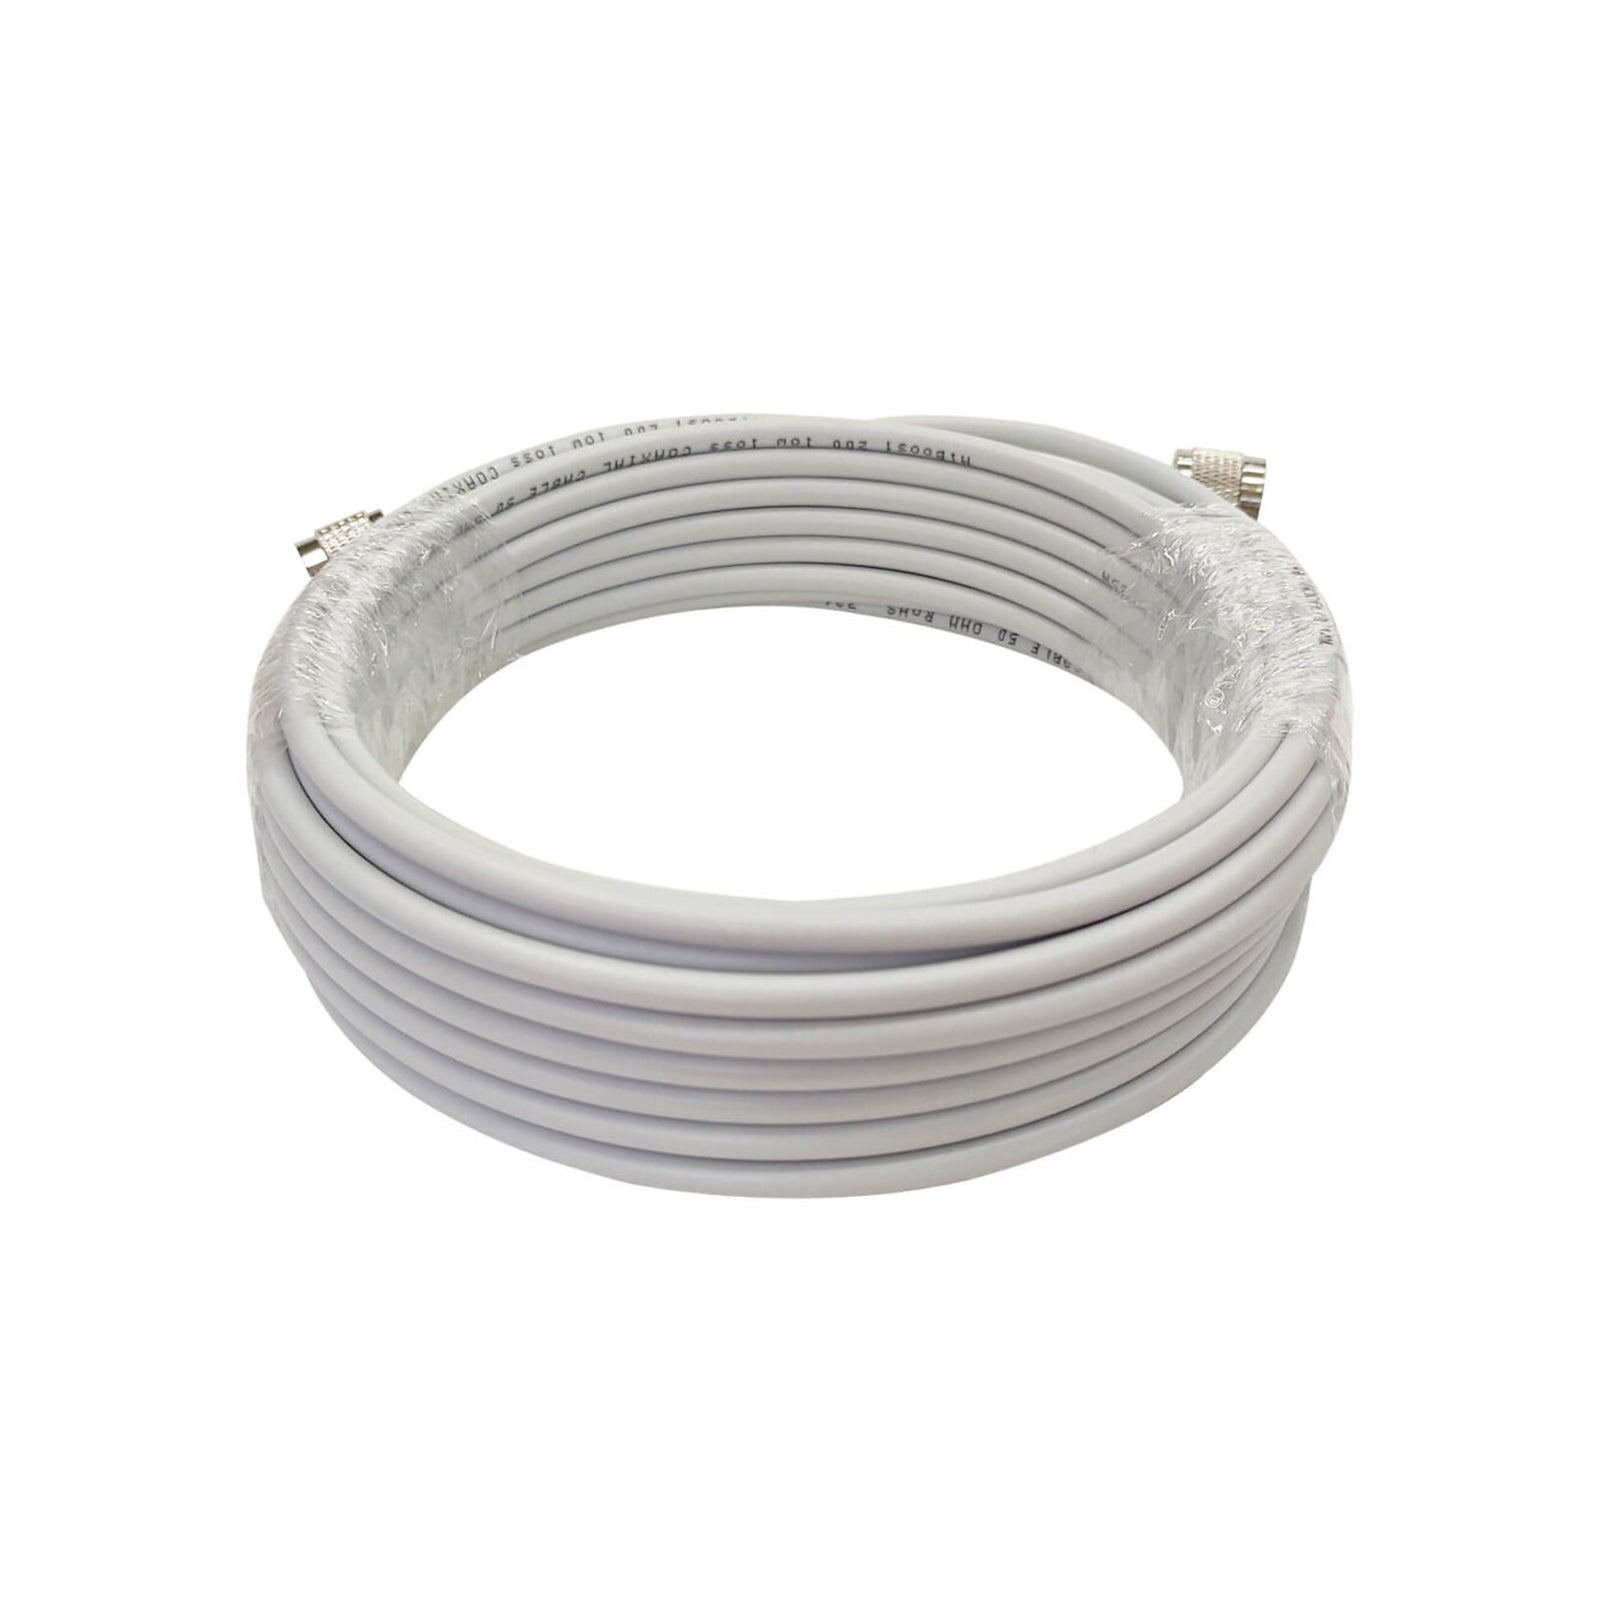 HiBoost 30ft Low-loss 200 Coaxial Cable